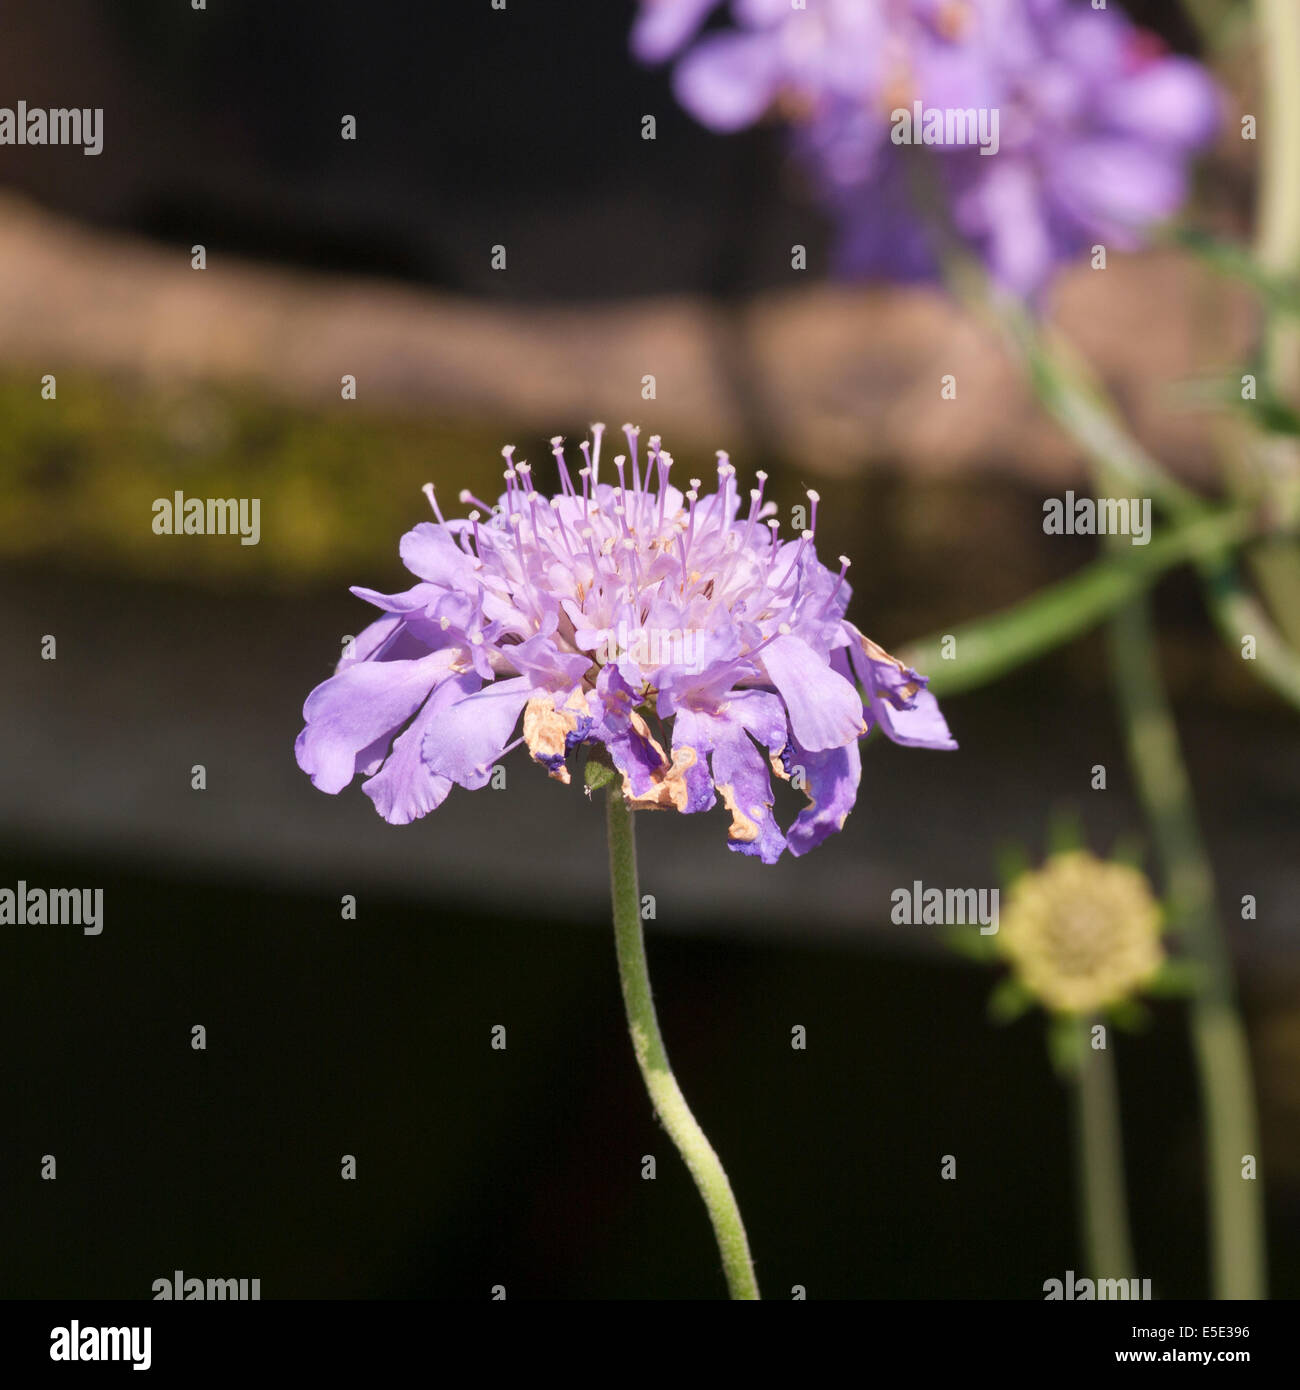 Scabiosa Blue Butterfly Commonly Known as Pincushion Flowers Stock Photo